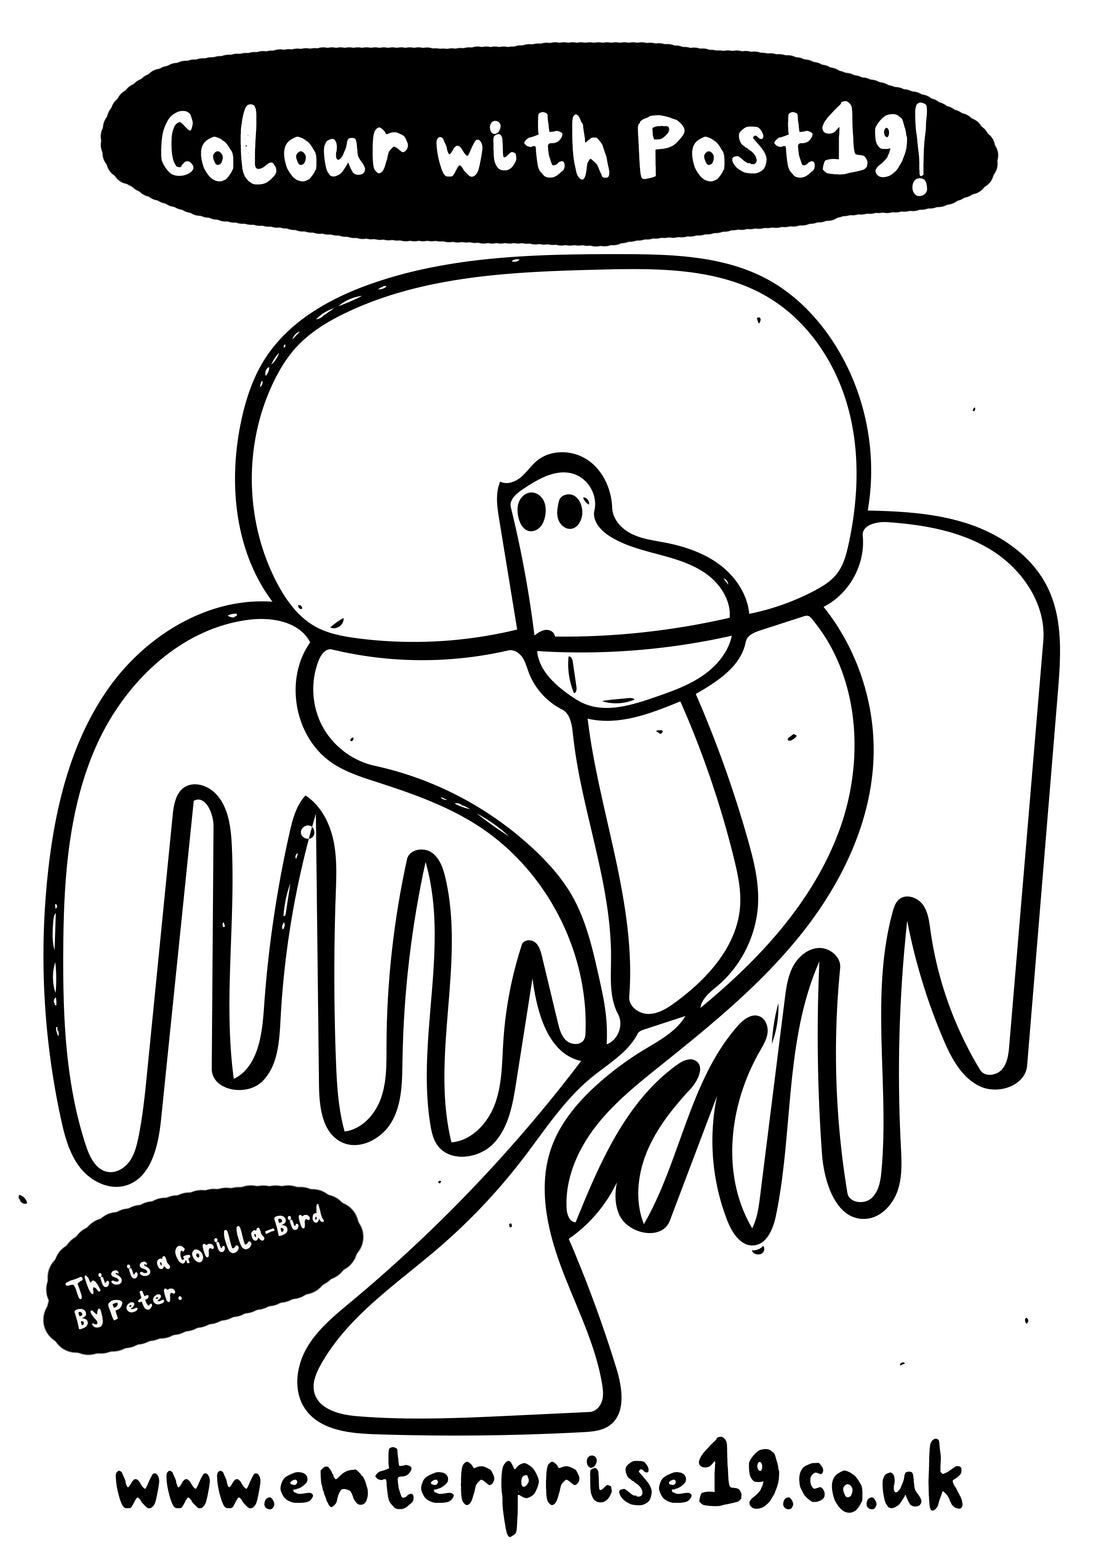 Peter N's Gorilla Bird Colouring Page